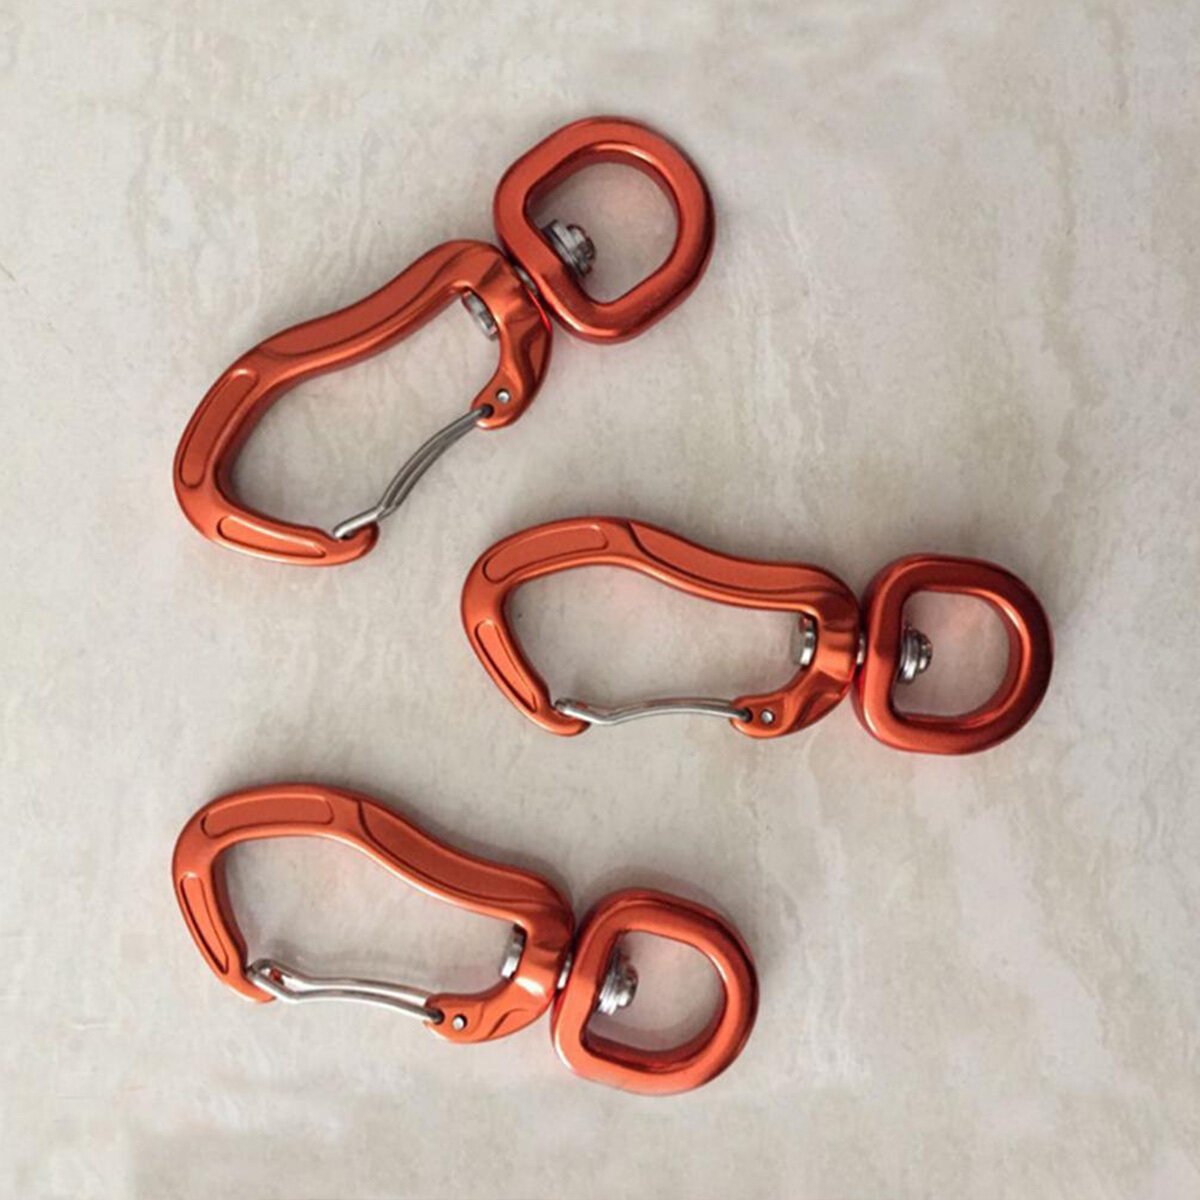 carabiner swivel and shackle, stainless steel shackle manufacturers, stainless steel shackle factory